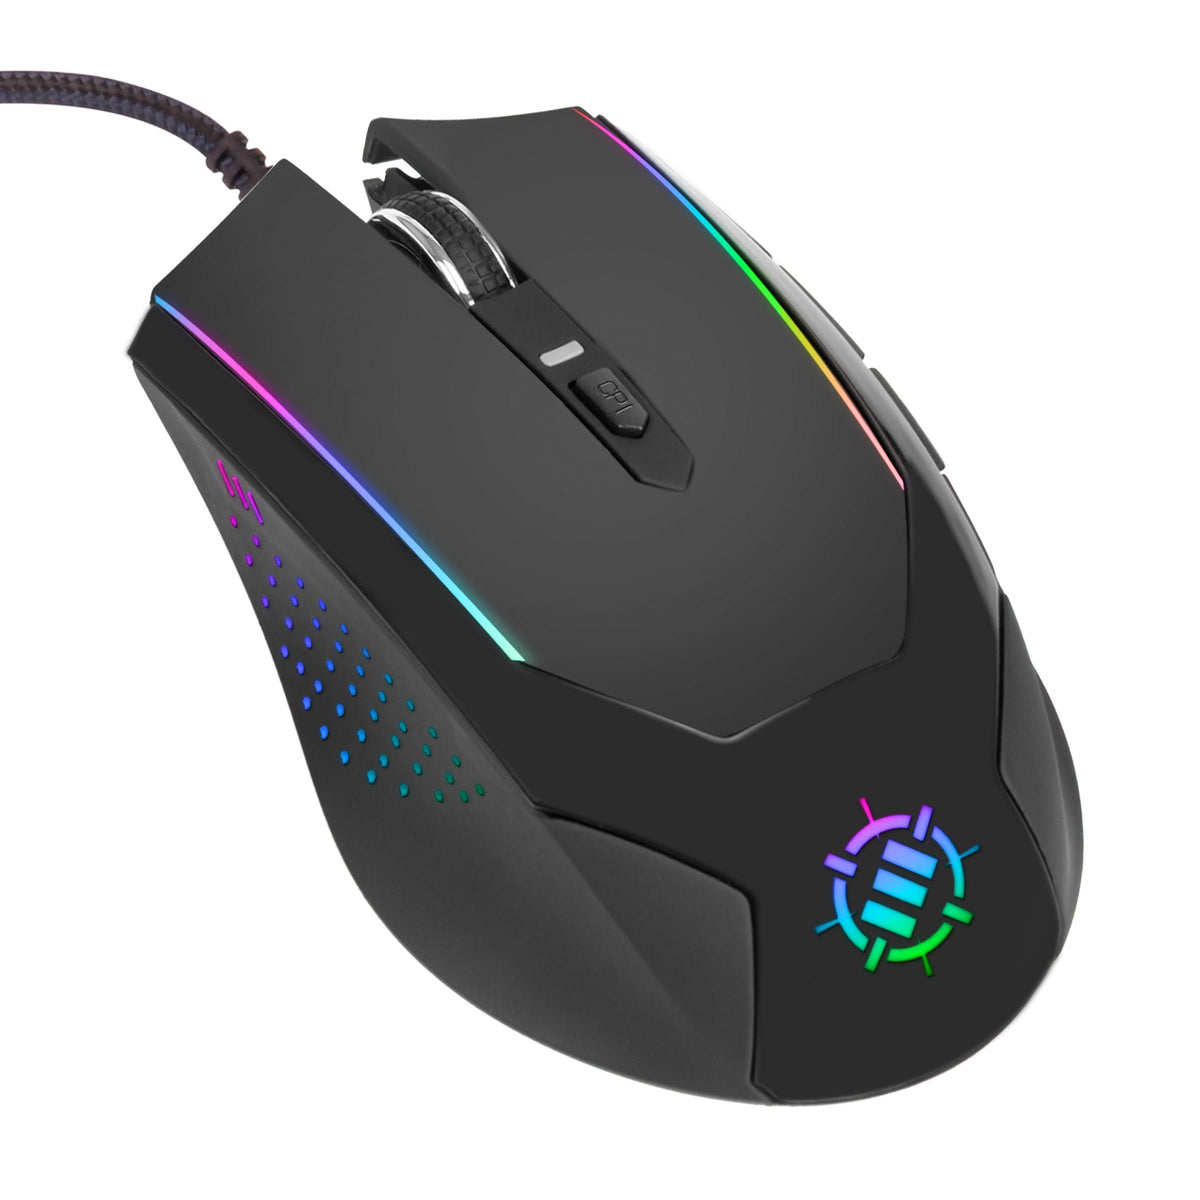 ENHANCE Computer PC Gaming Mouse Adjustable 3500 DPI LED Lighting, Accuracy Tracking Optical Sensor, Ergonomic 6 Button Design, Braided Cable, Color Changing, Slim Profile